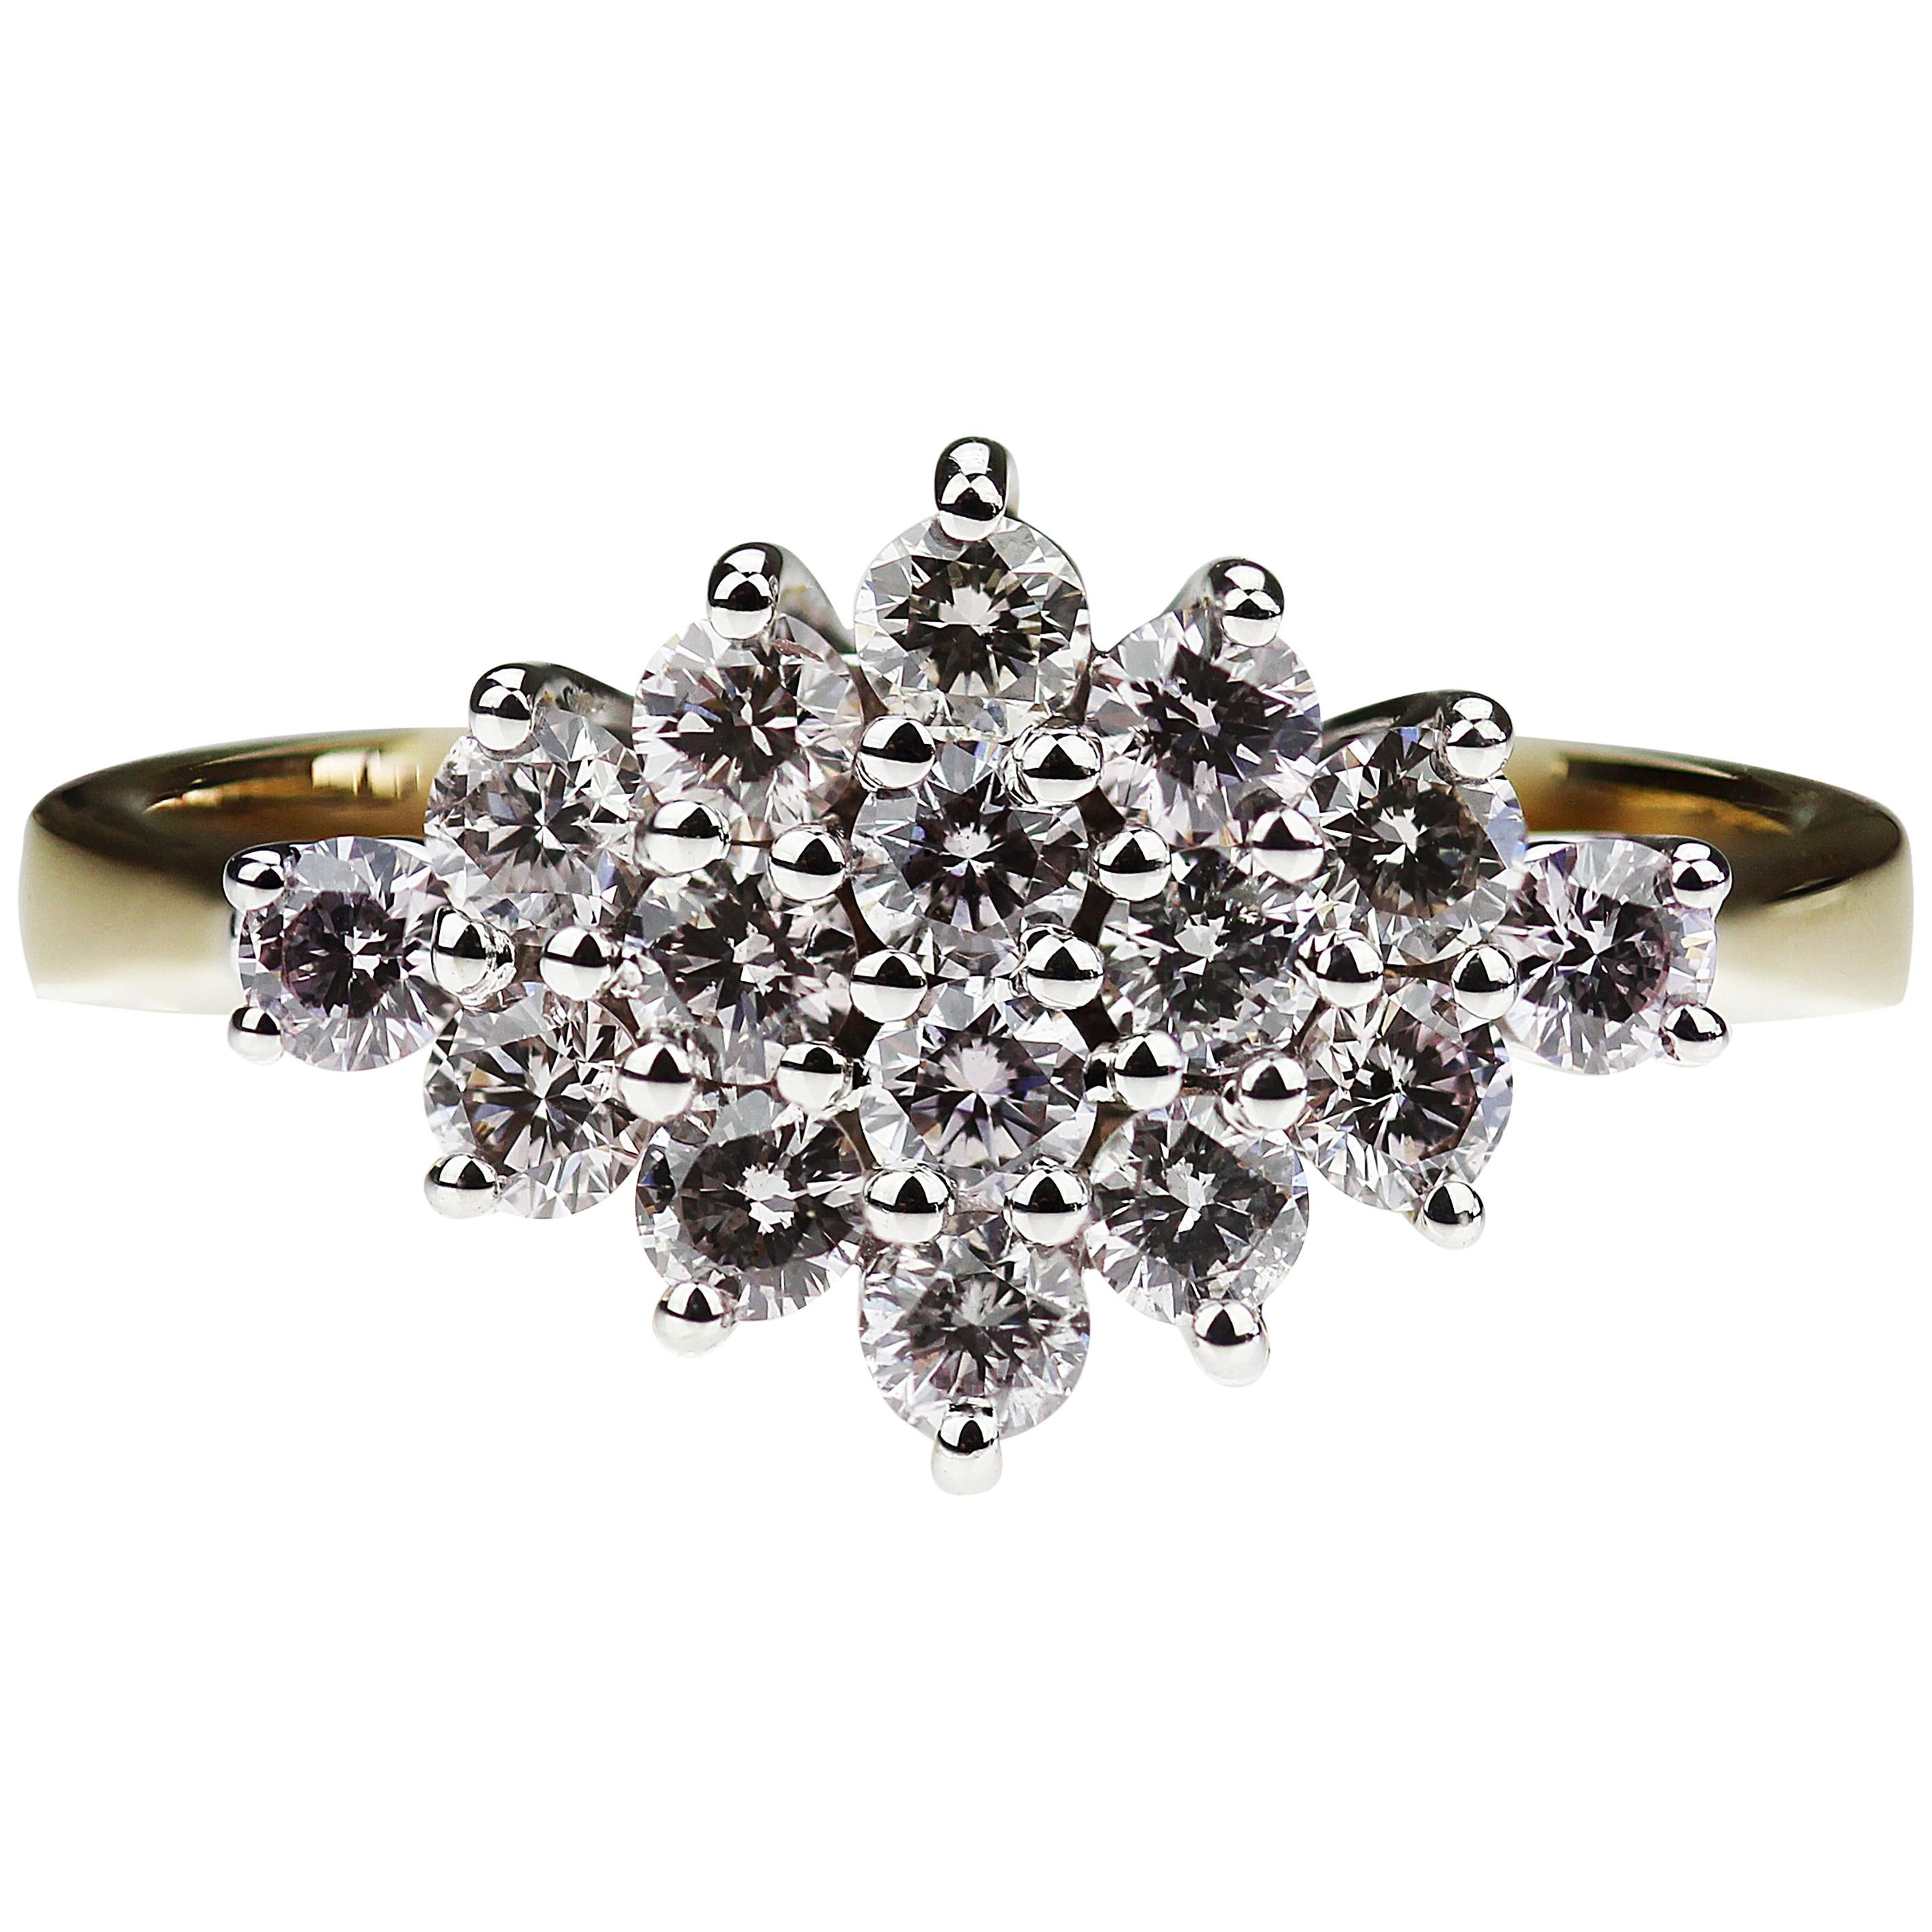 Natural Fancy Pink Diamond, Cluster Ring in 18K White & Yellow Gold